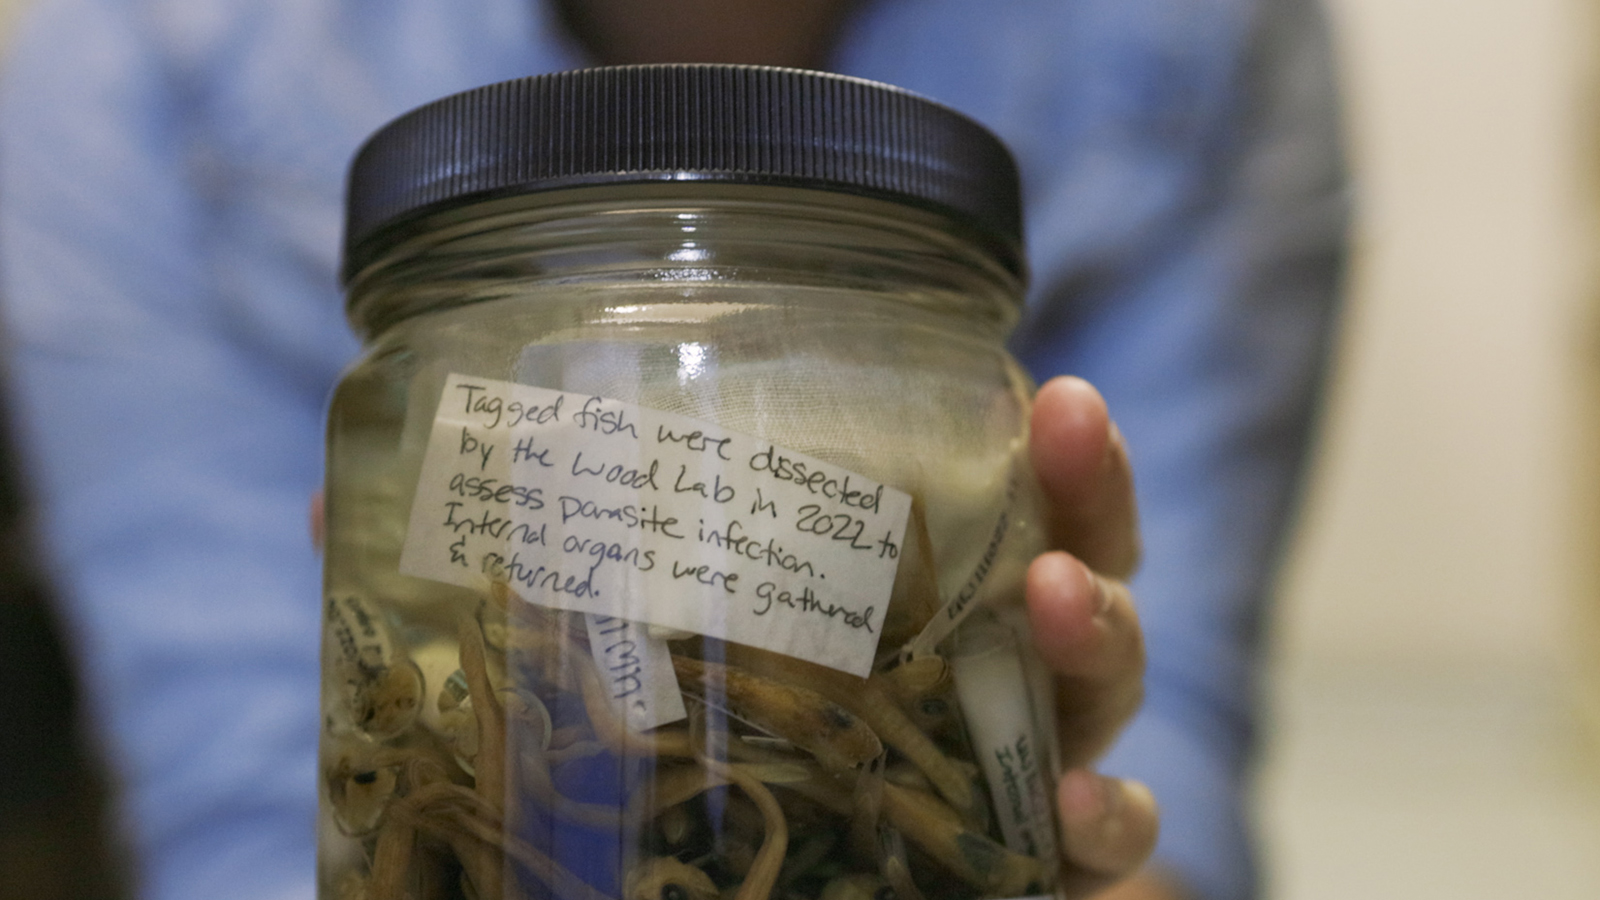 A glass jar labeled with a note reading, "Tagged fish were dissected by the Wood Lab in 2022 to assess parasite infection. Internal organs were gathered and returned."